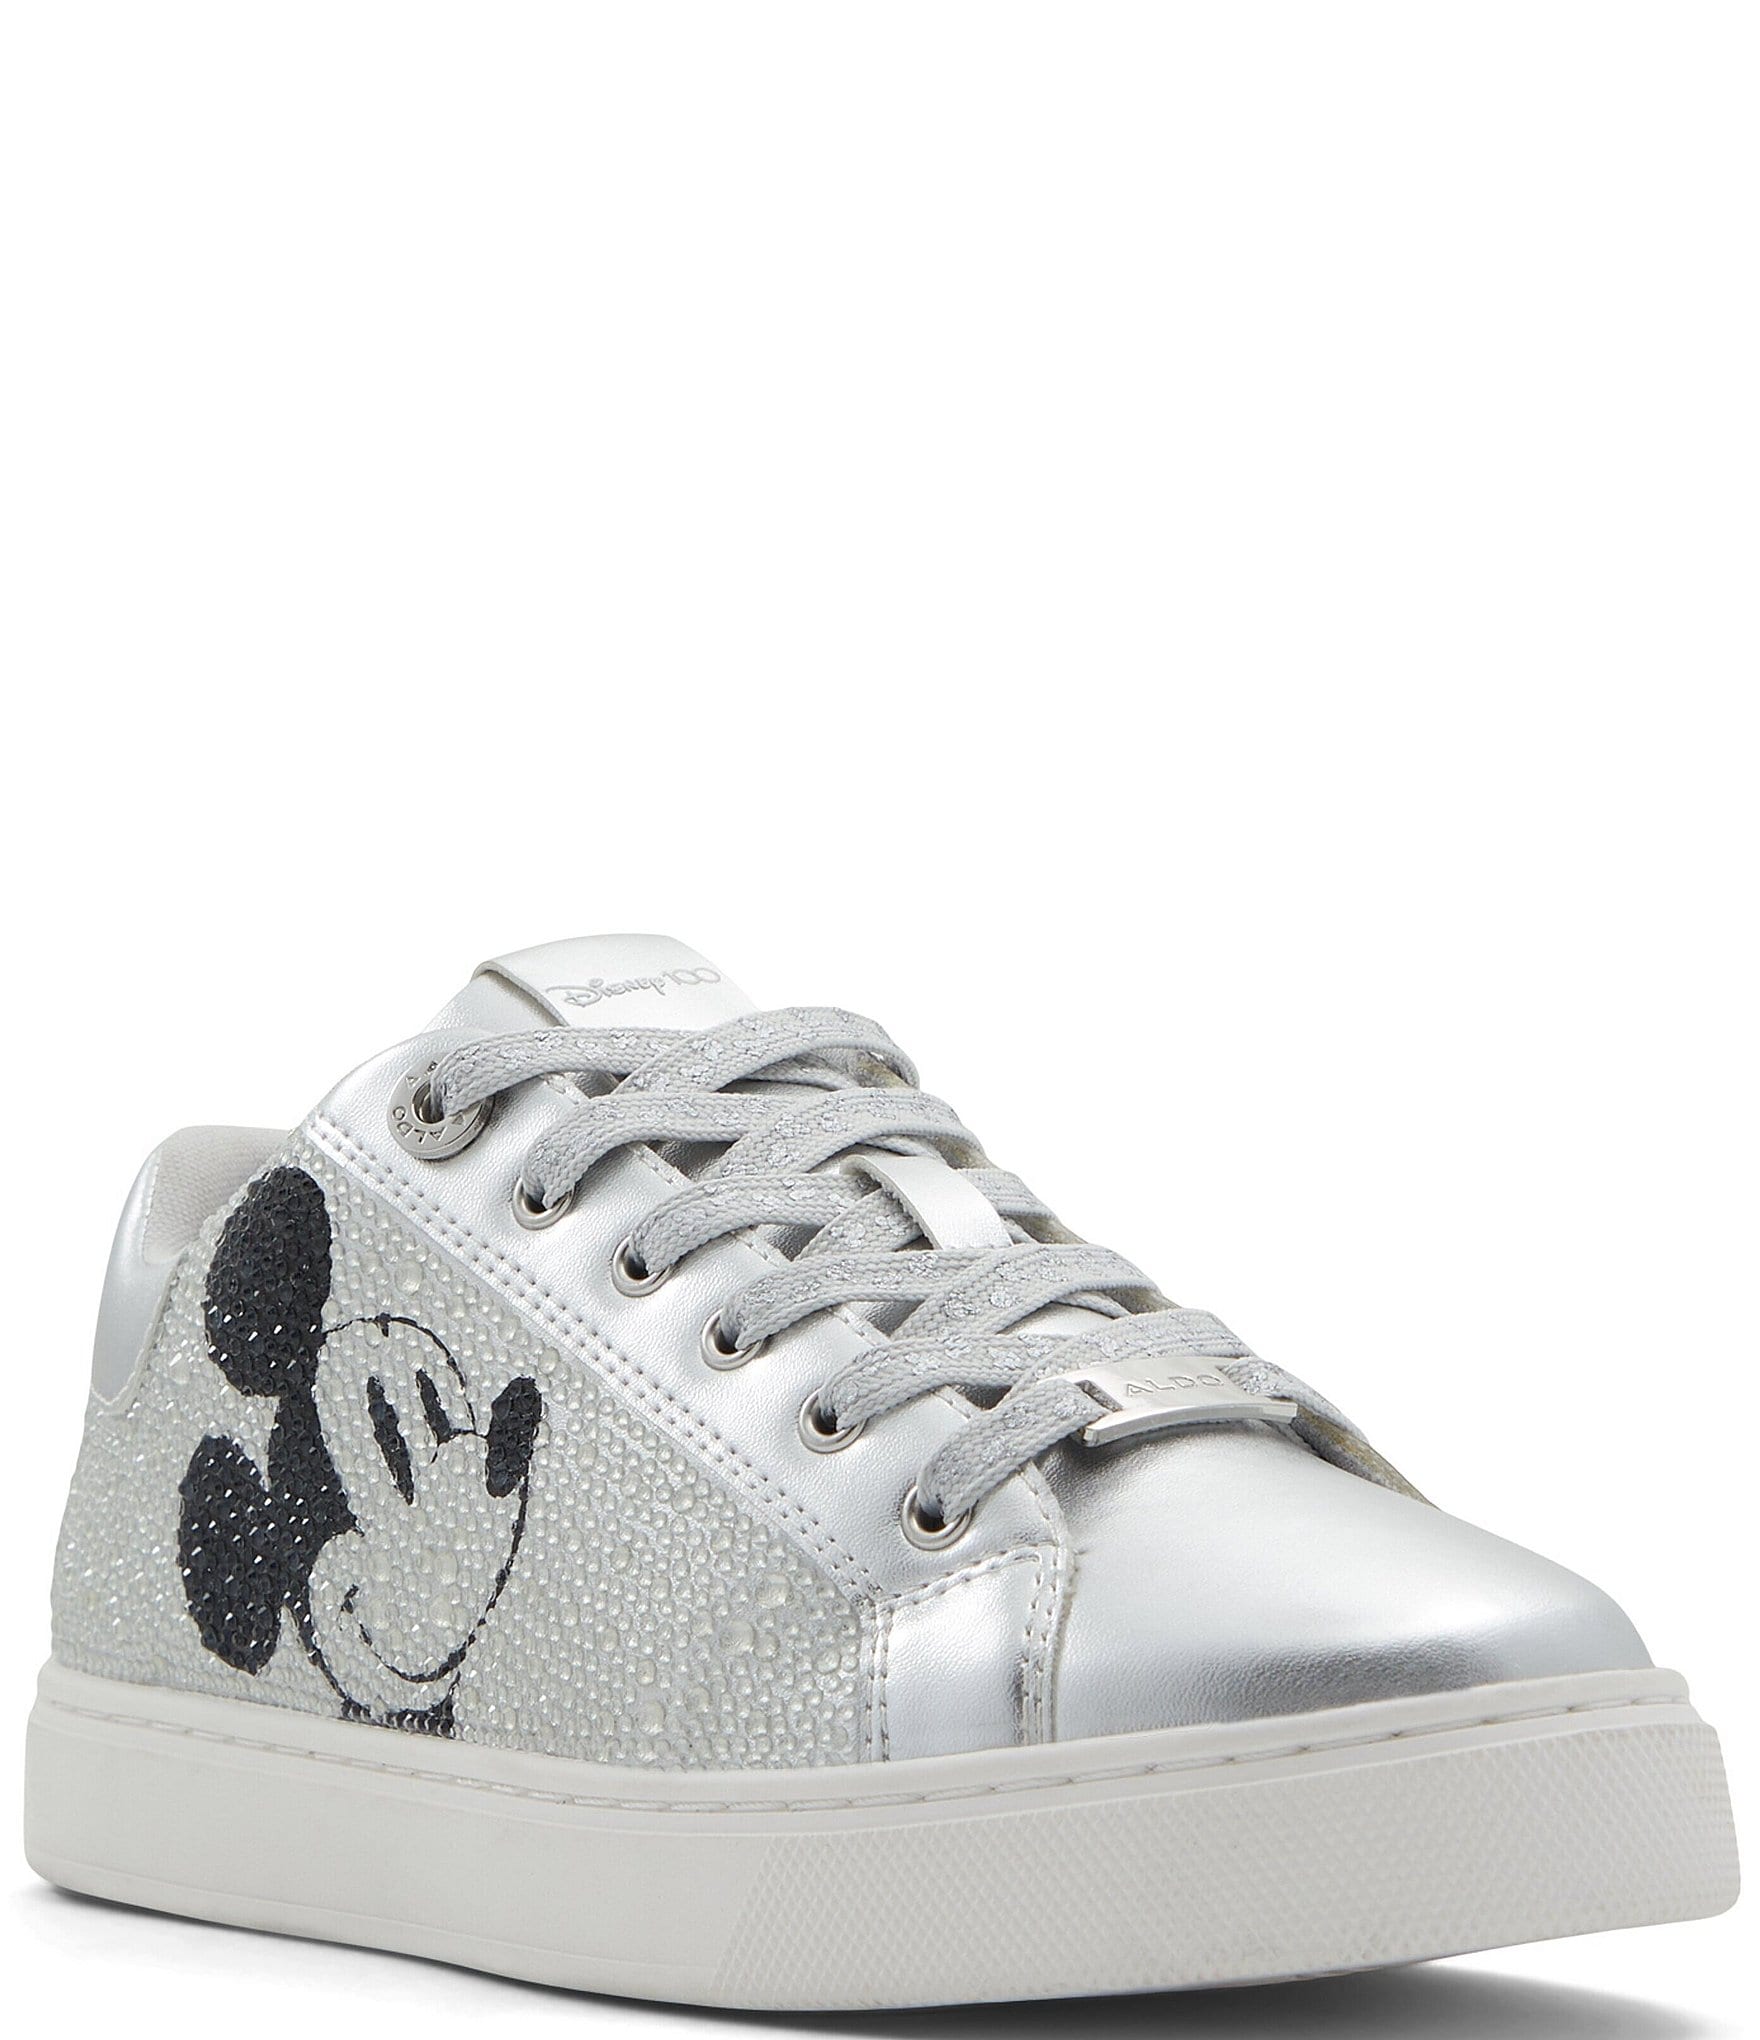 Top more than 206 aldo mickey mouse sneakers best